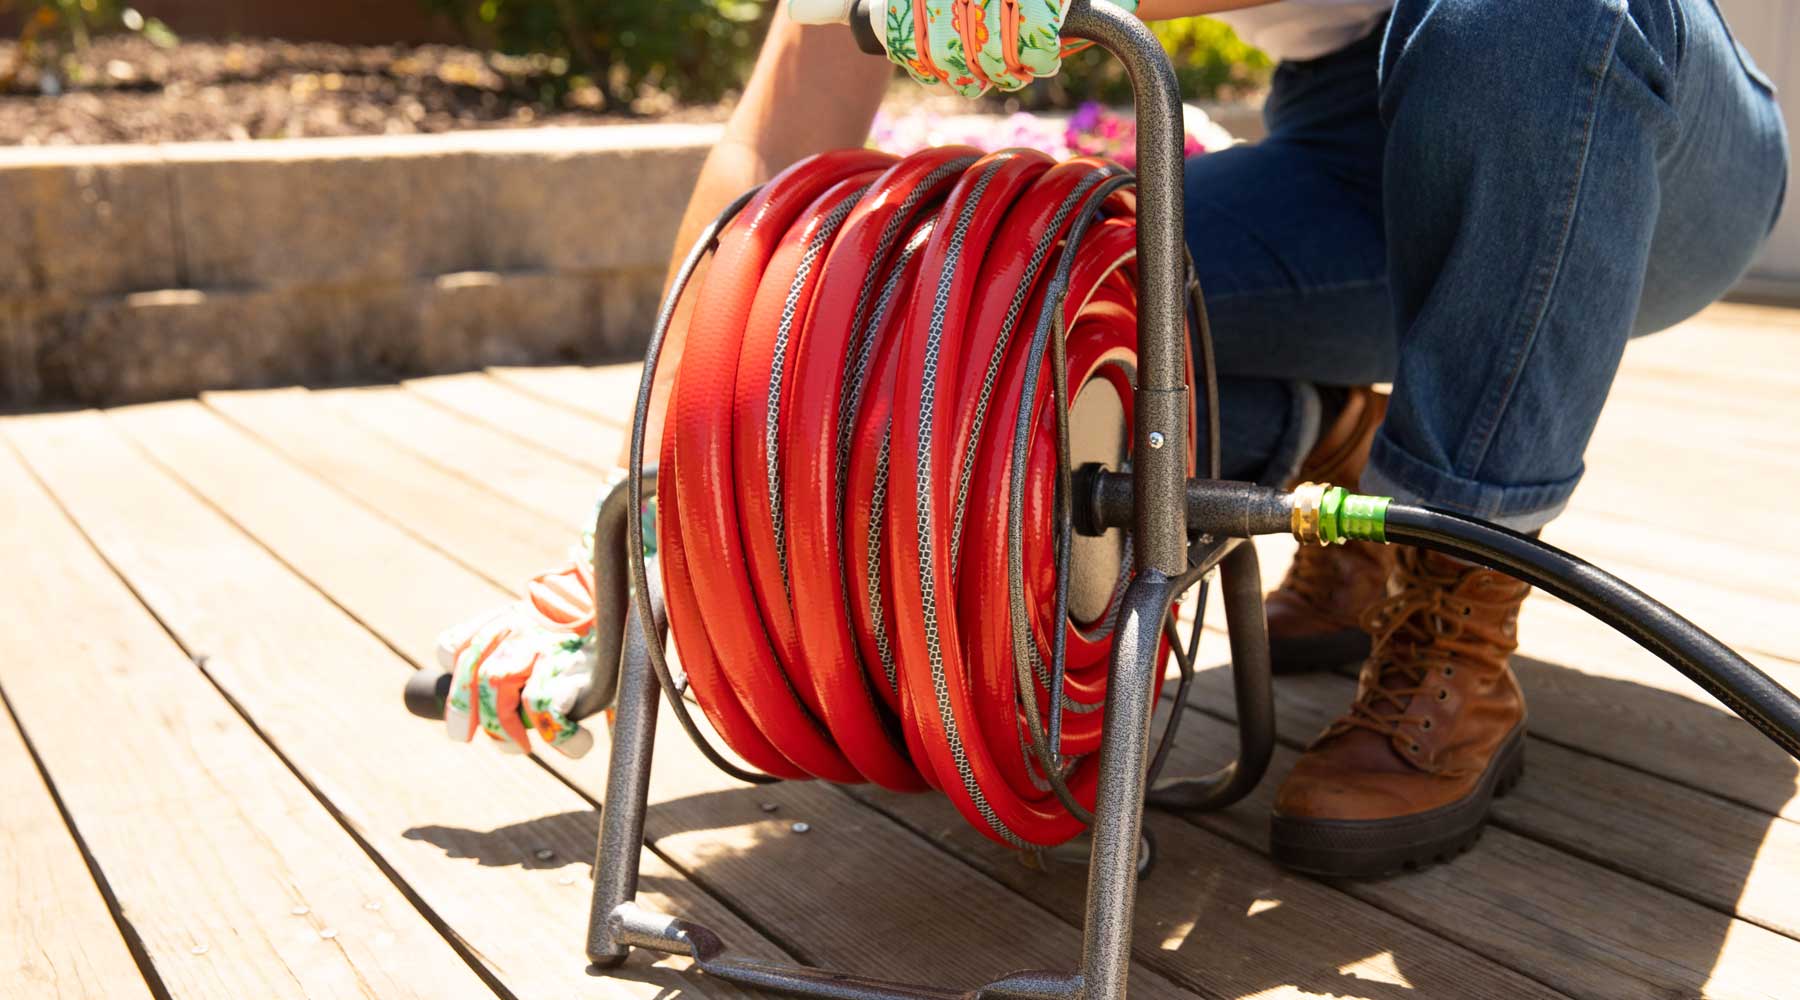 Best Sellers: The most popular items in Garden Hose Reels